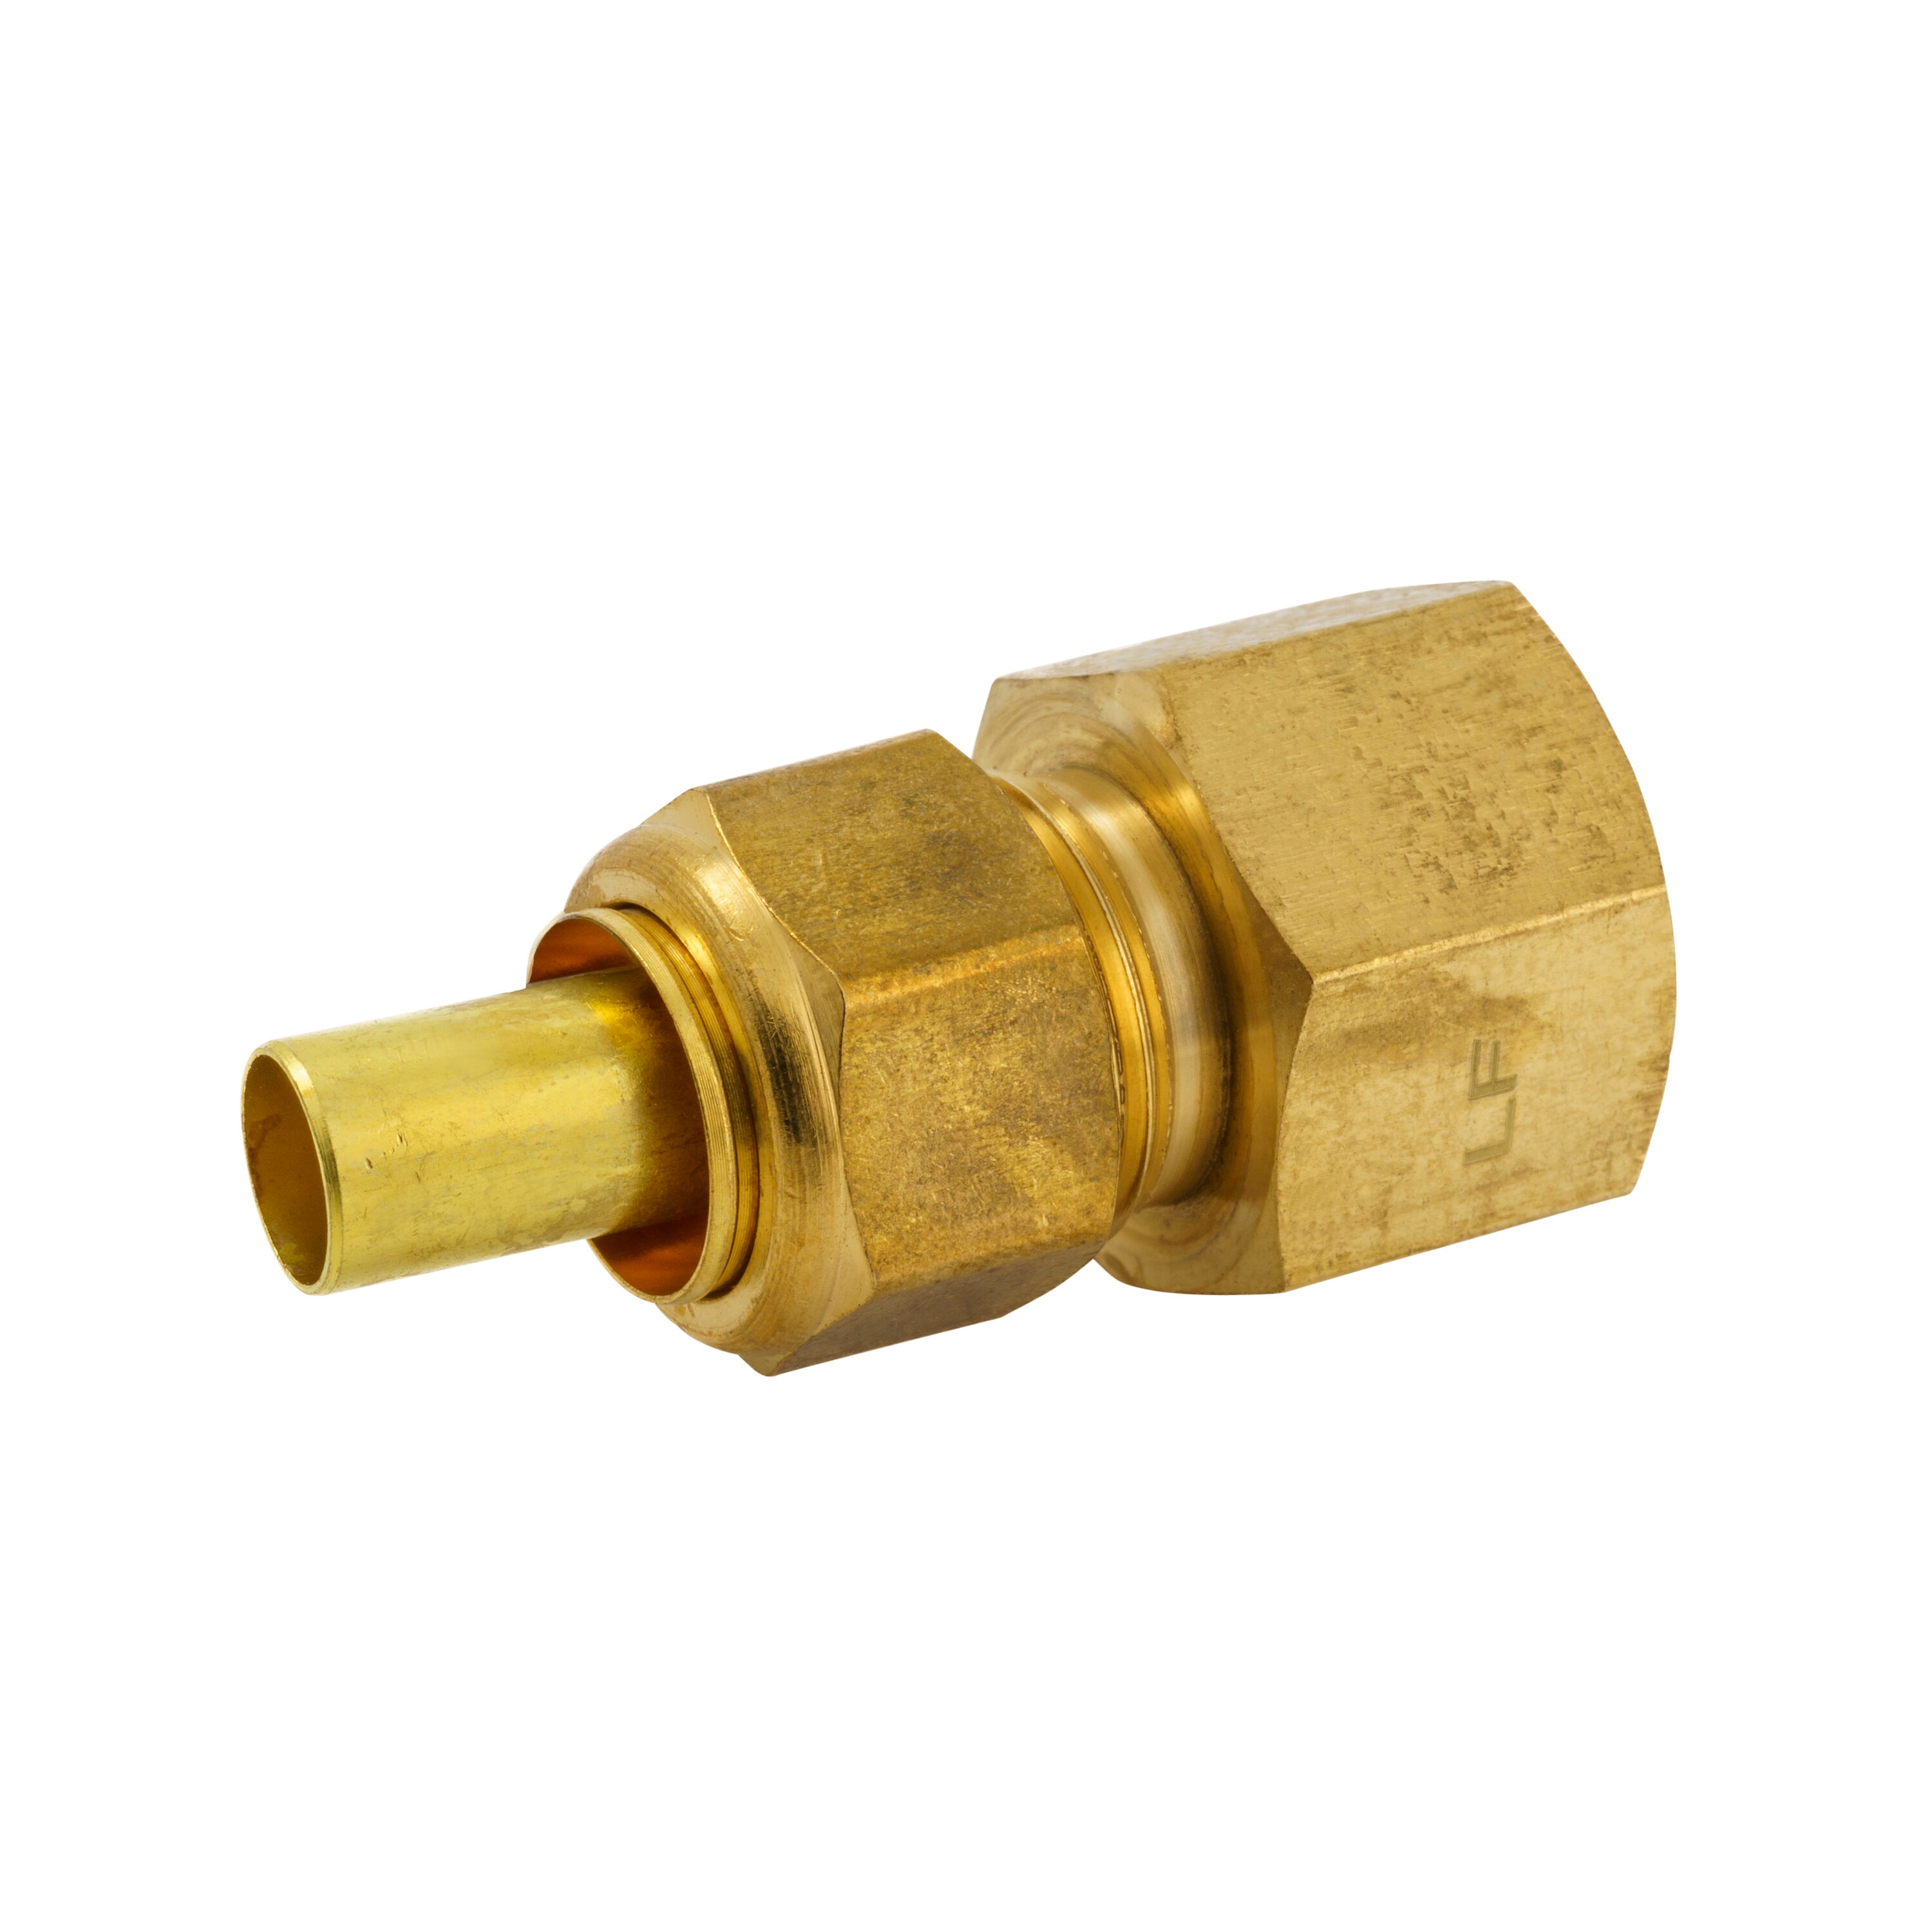 1/2 in. FIP Brass Pipe Coupling Fitting (5-Pack)